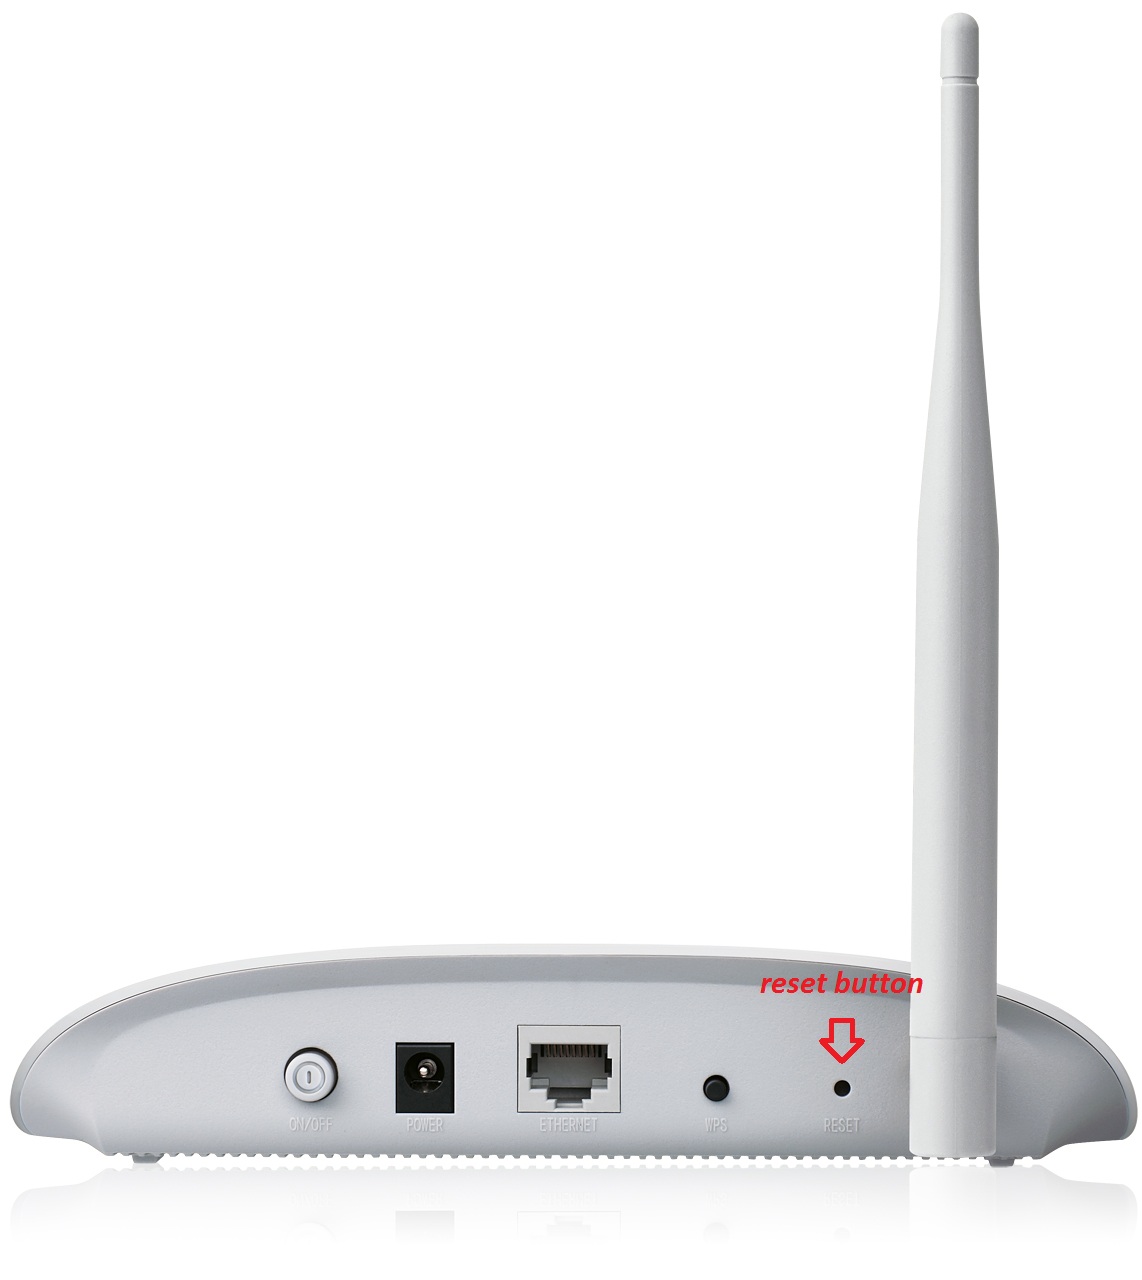 Hard reset TP-LINK TL-WA30ND - How to Hard Reset Your Router